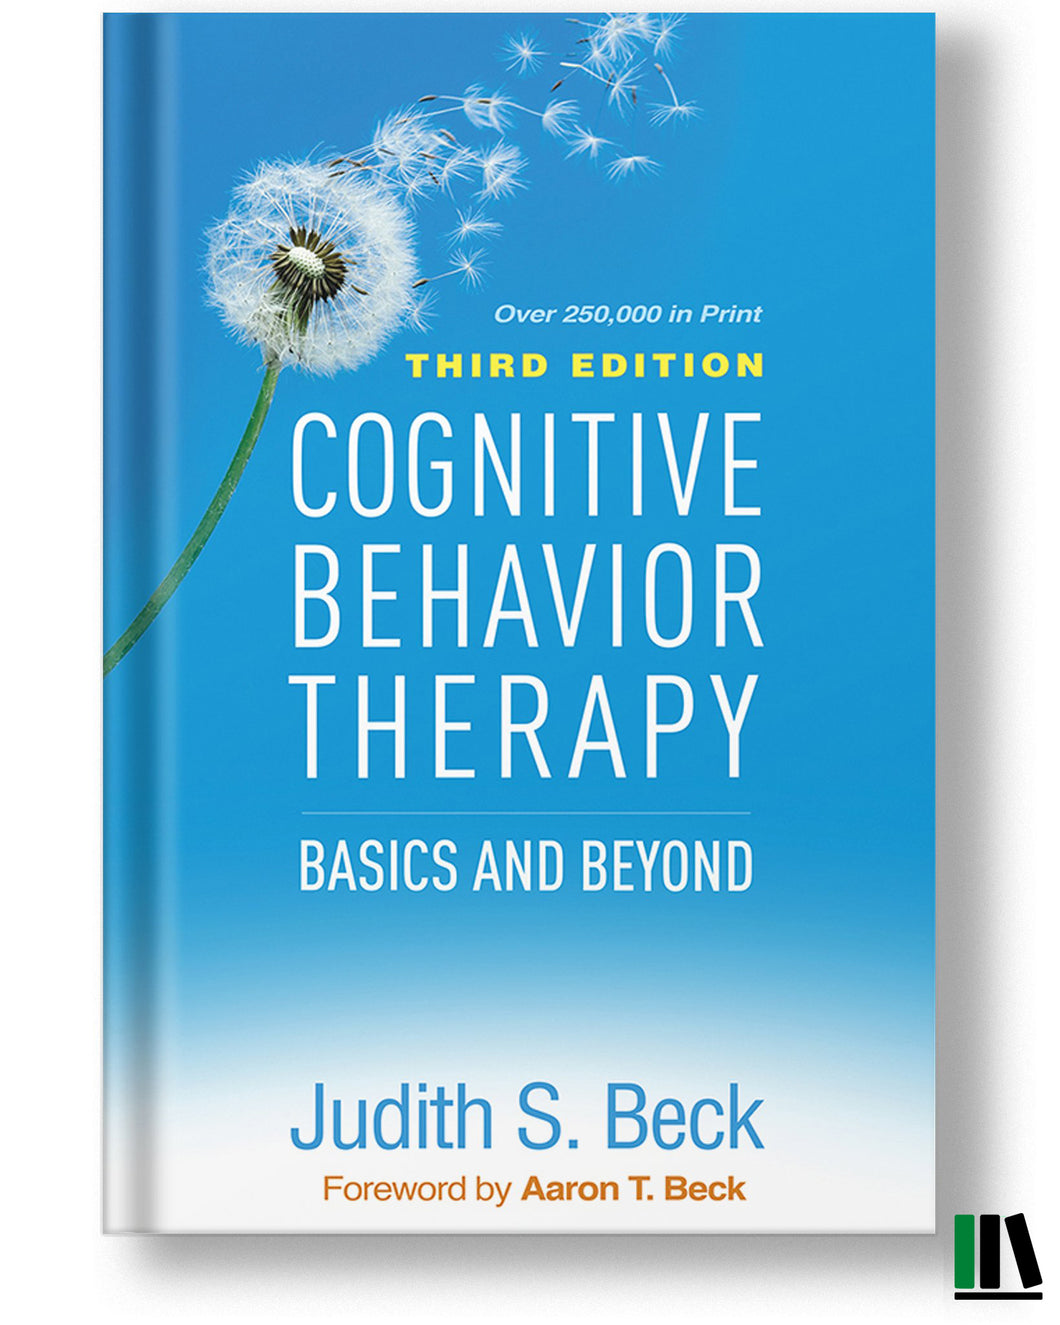 Cognitive Behavior Therapy: Basics and Beyond, Third Edition